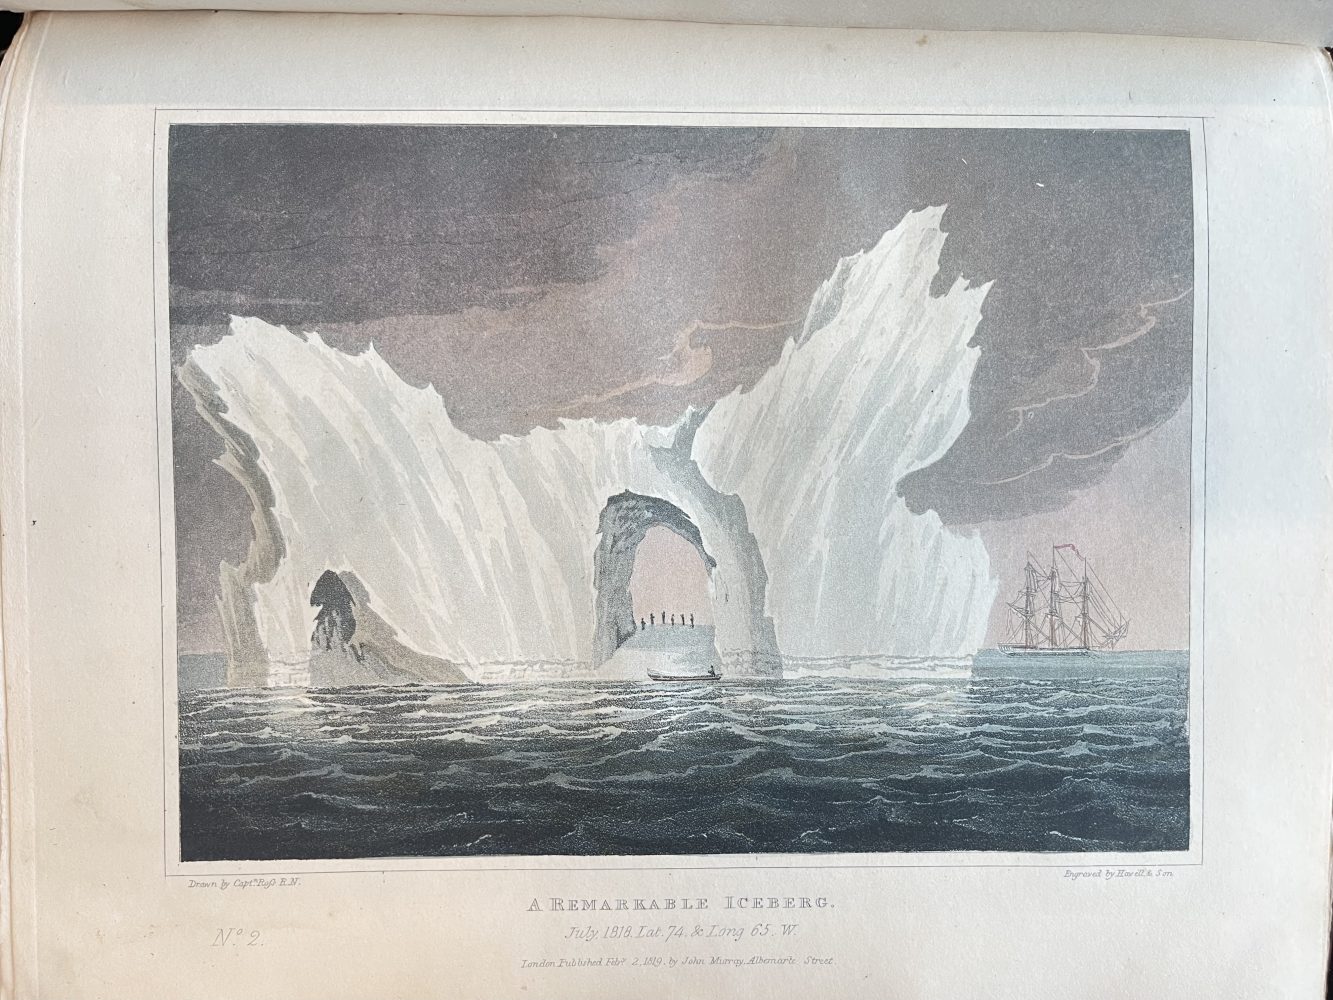 archival image from the James Ford Bell Library titled A Remarkable Iceberg, July 1818